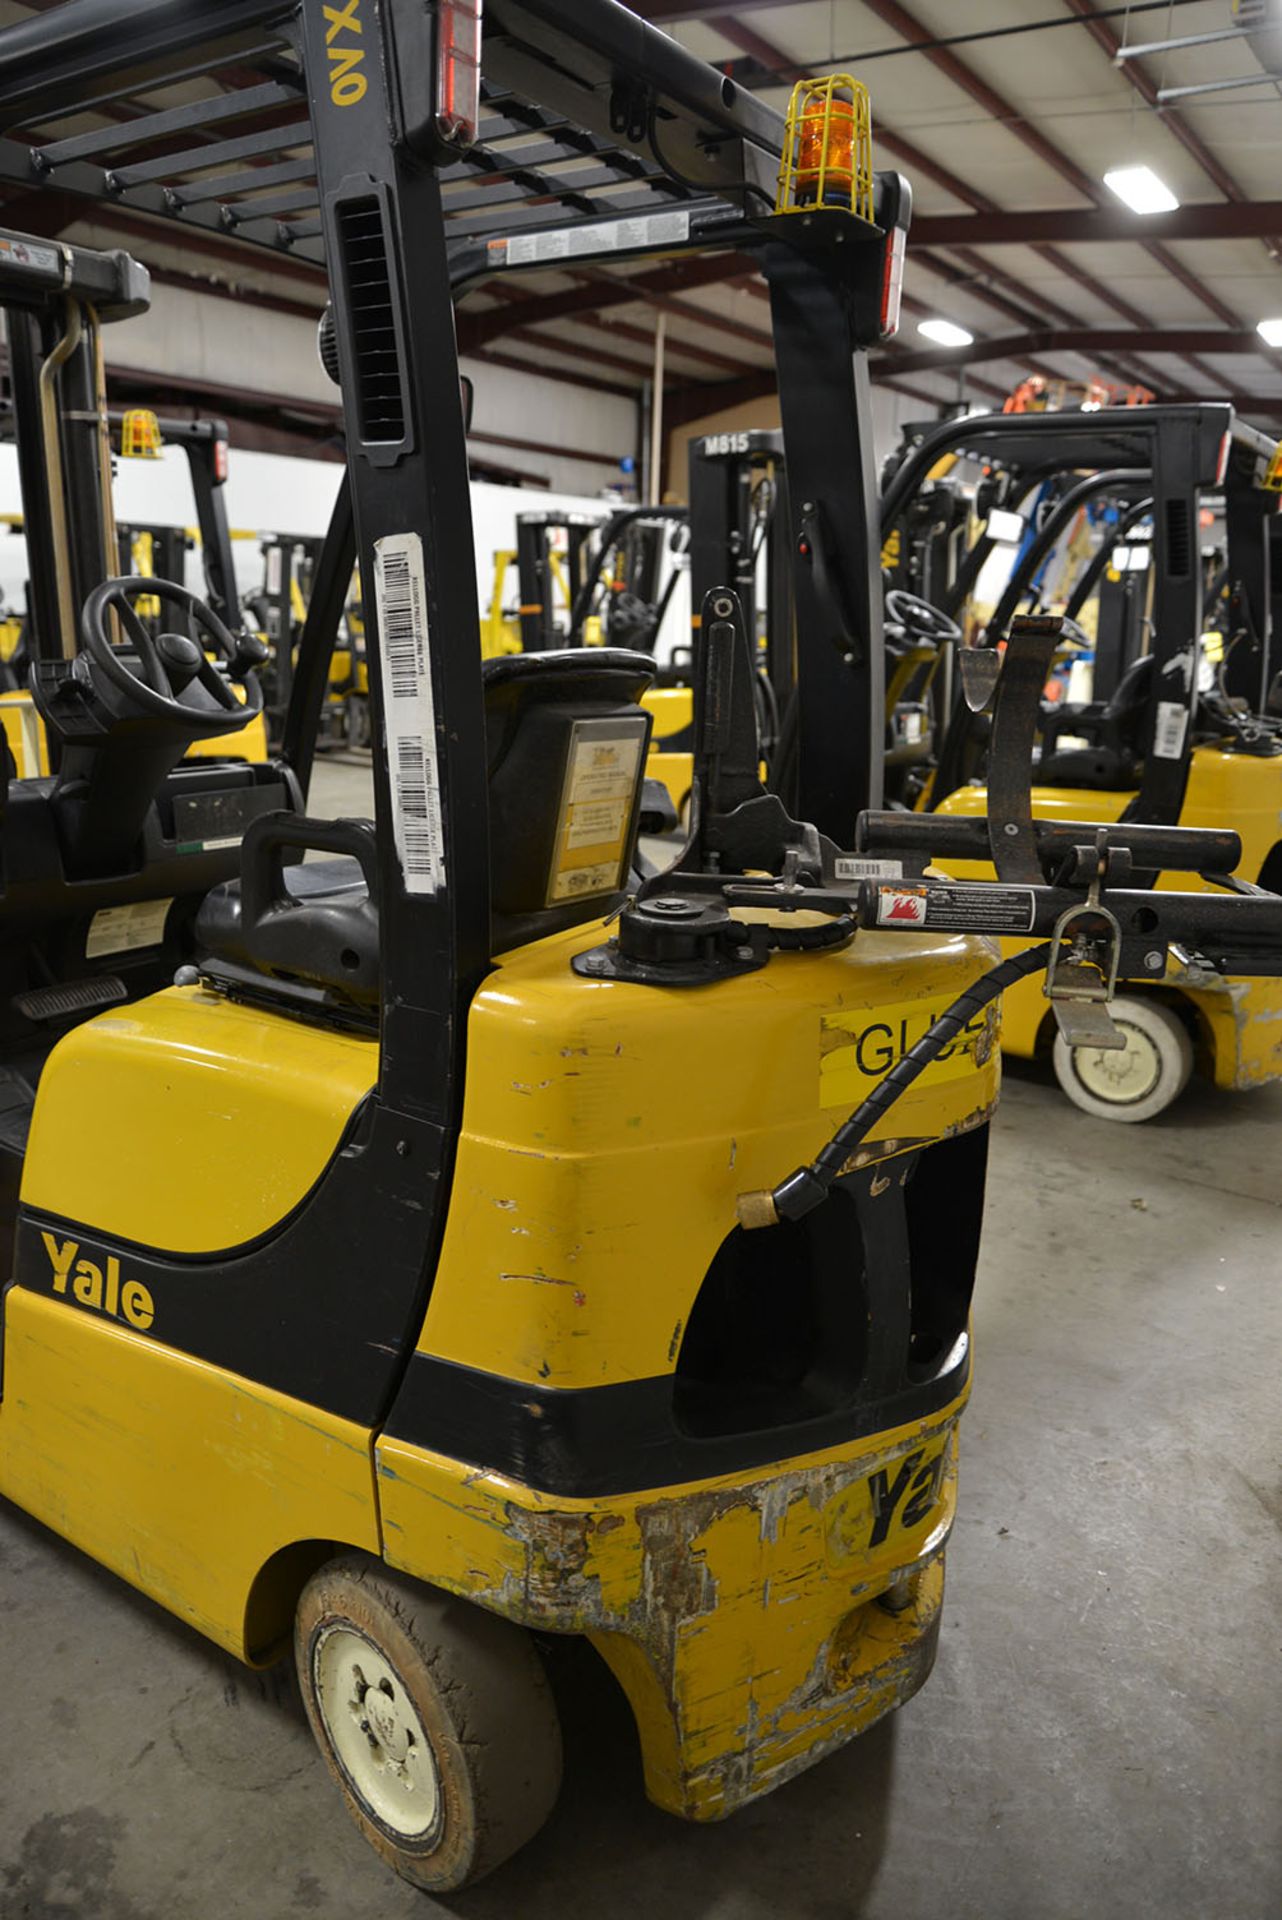 2008 YALE 5,000-lb. Capacity Forklift, Model GLC050VXNV, S/N NA, LPG, Solid Non-Marking Tires, 2- - Image 5 of 7